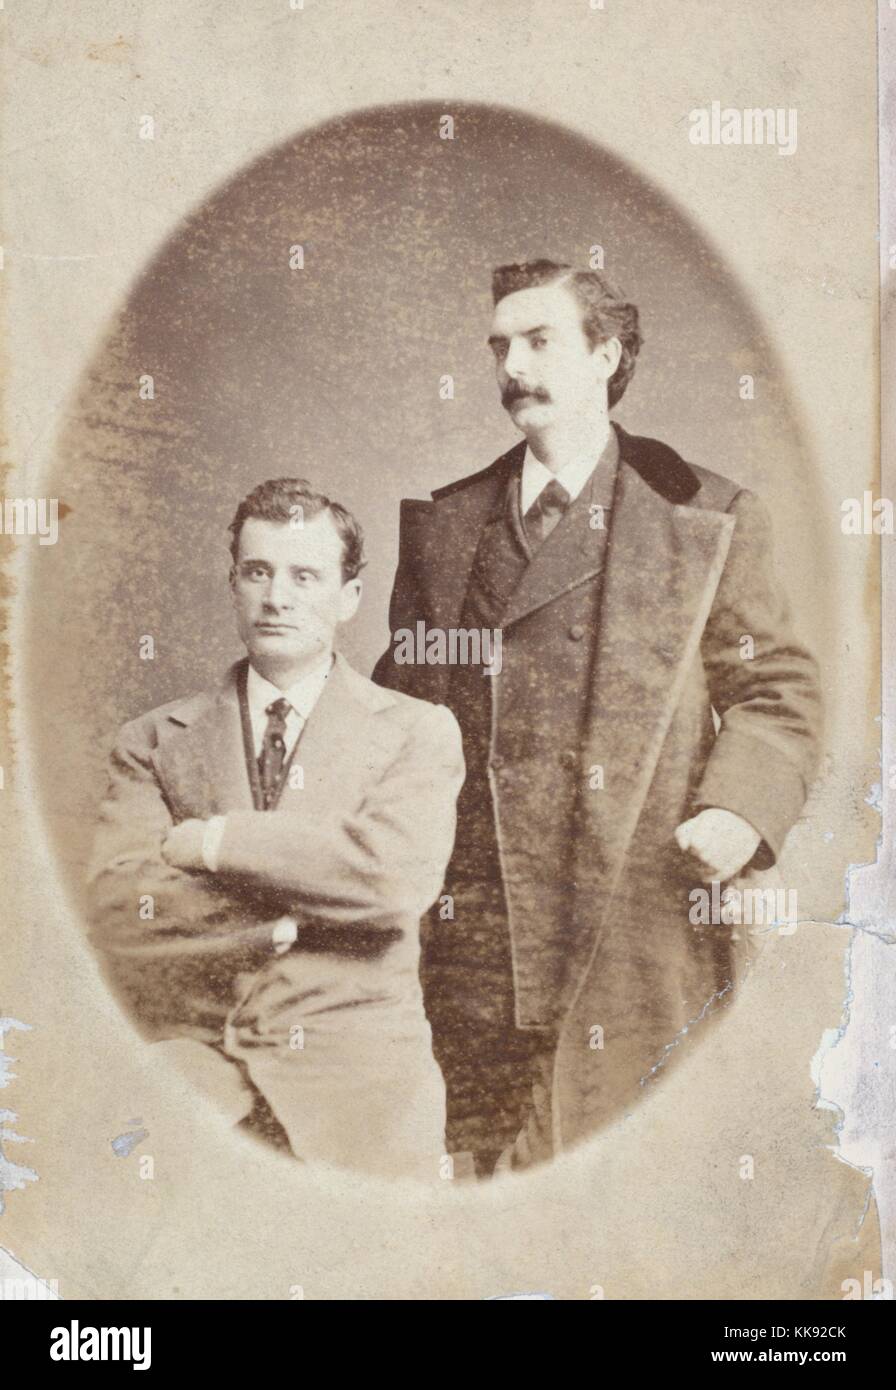 The comedic duo Harrigan and Hart, Edward Harrigan on the left, Tony Hart on the right, one of the most celebrated theatrical partnerships of the 19th century, 1760. From the New York Public Library. Stock Photo